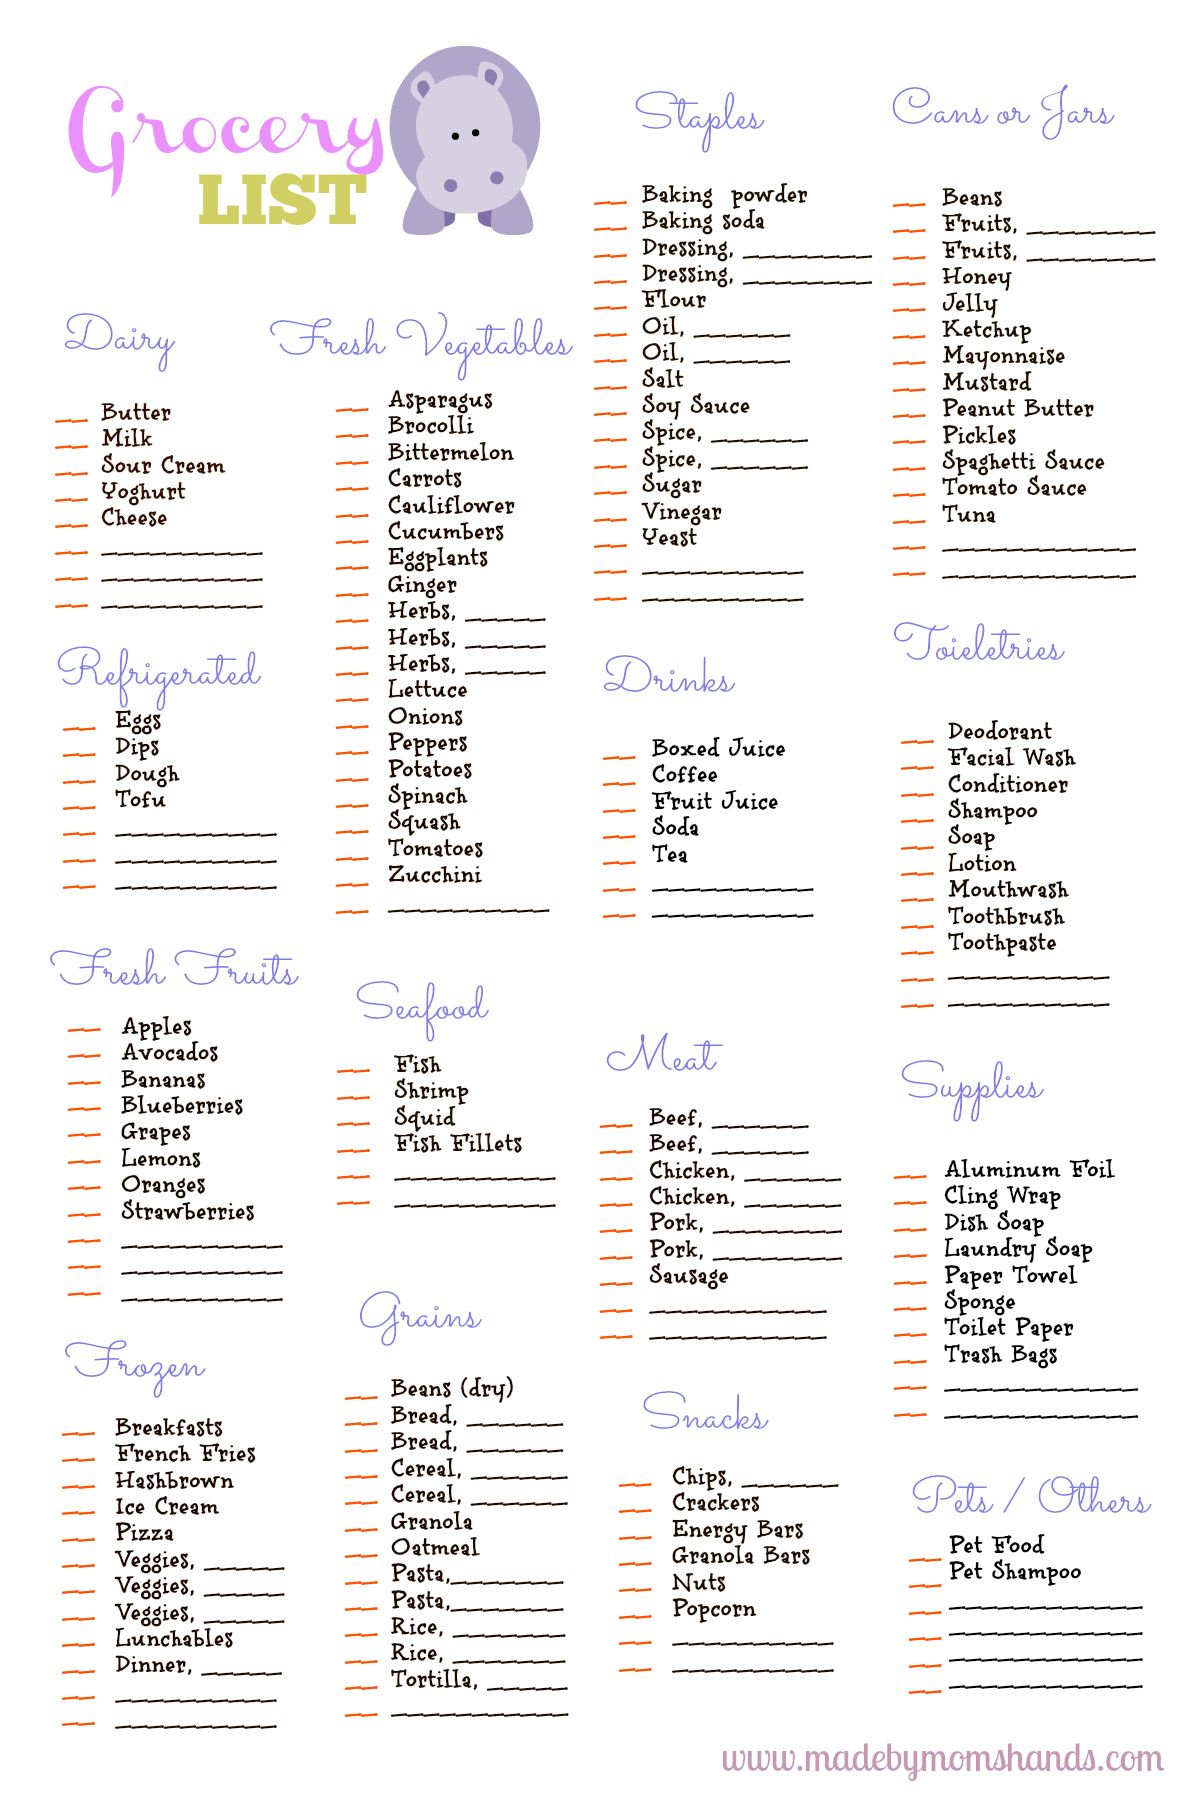 Free Grocery CHECK List Printable Free Groceries 